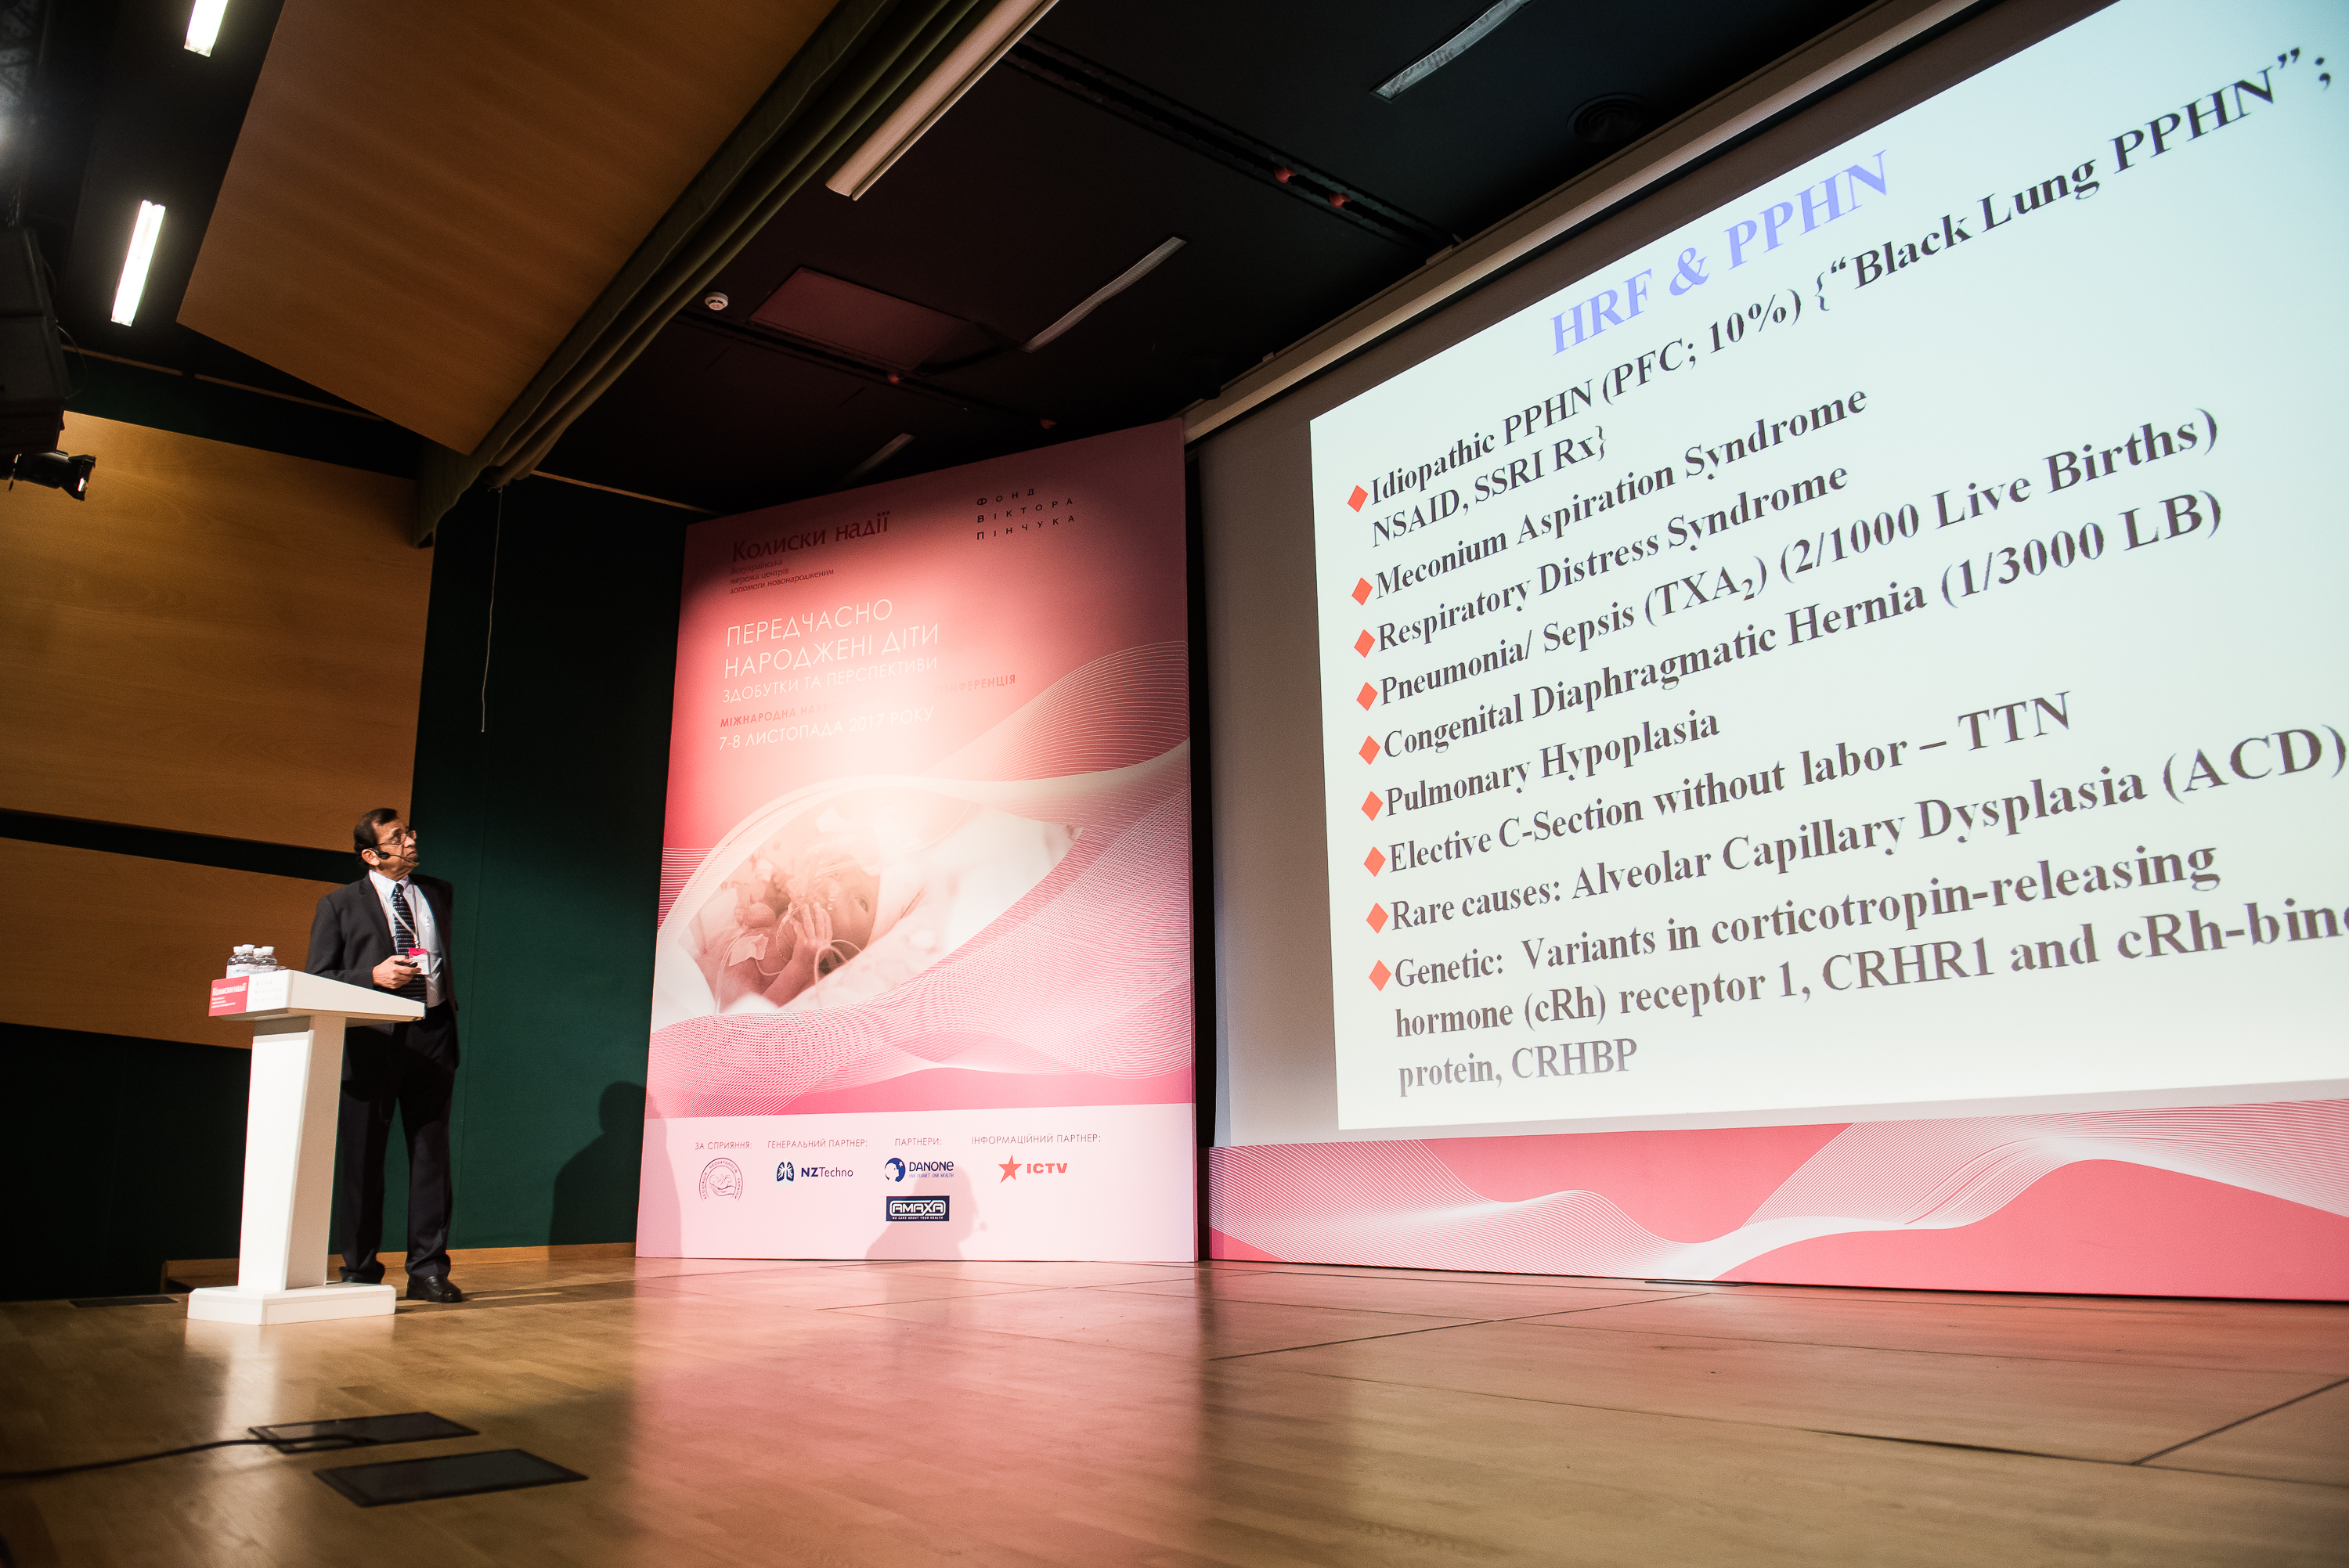 TV reports about the 9th academic and practice conference for doctors and nurses of newborn intensive care units